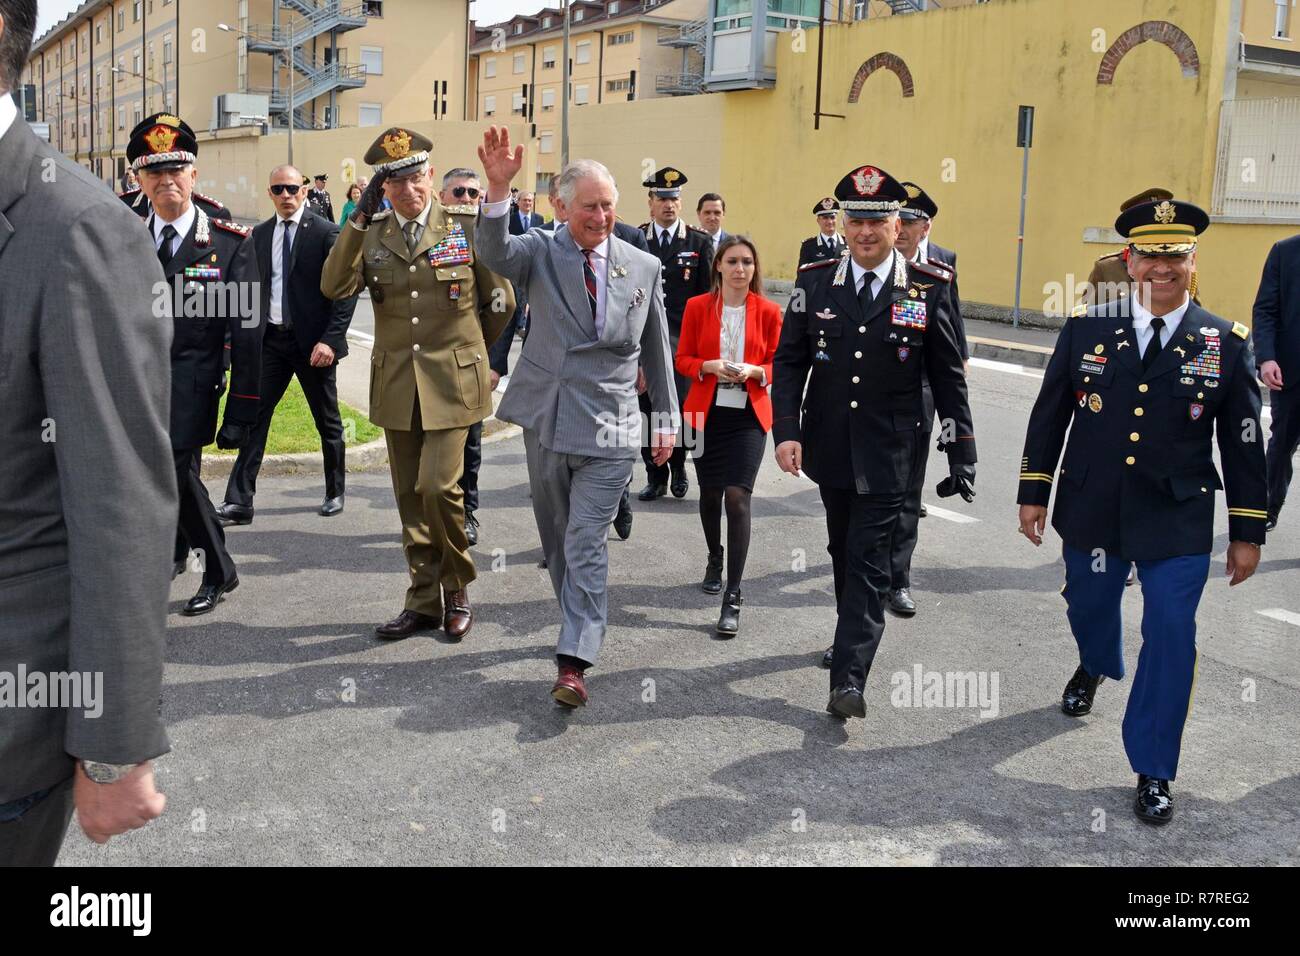 His Royal Highness, Prince Charles, Prince of Wales, during visit at Center of Excellence for Stability Police Units (CoESPU) Vicenza, Italy, April 1, 2017. Stock Photo